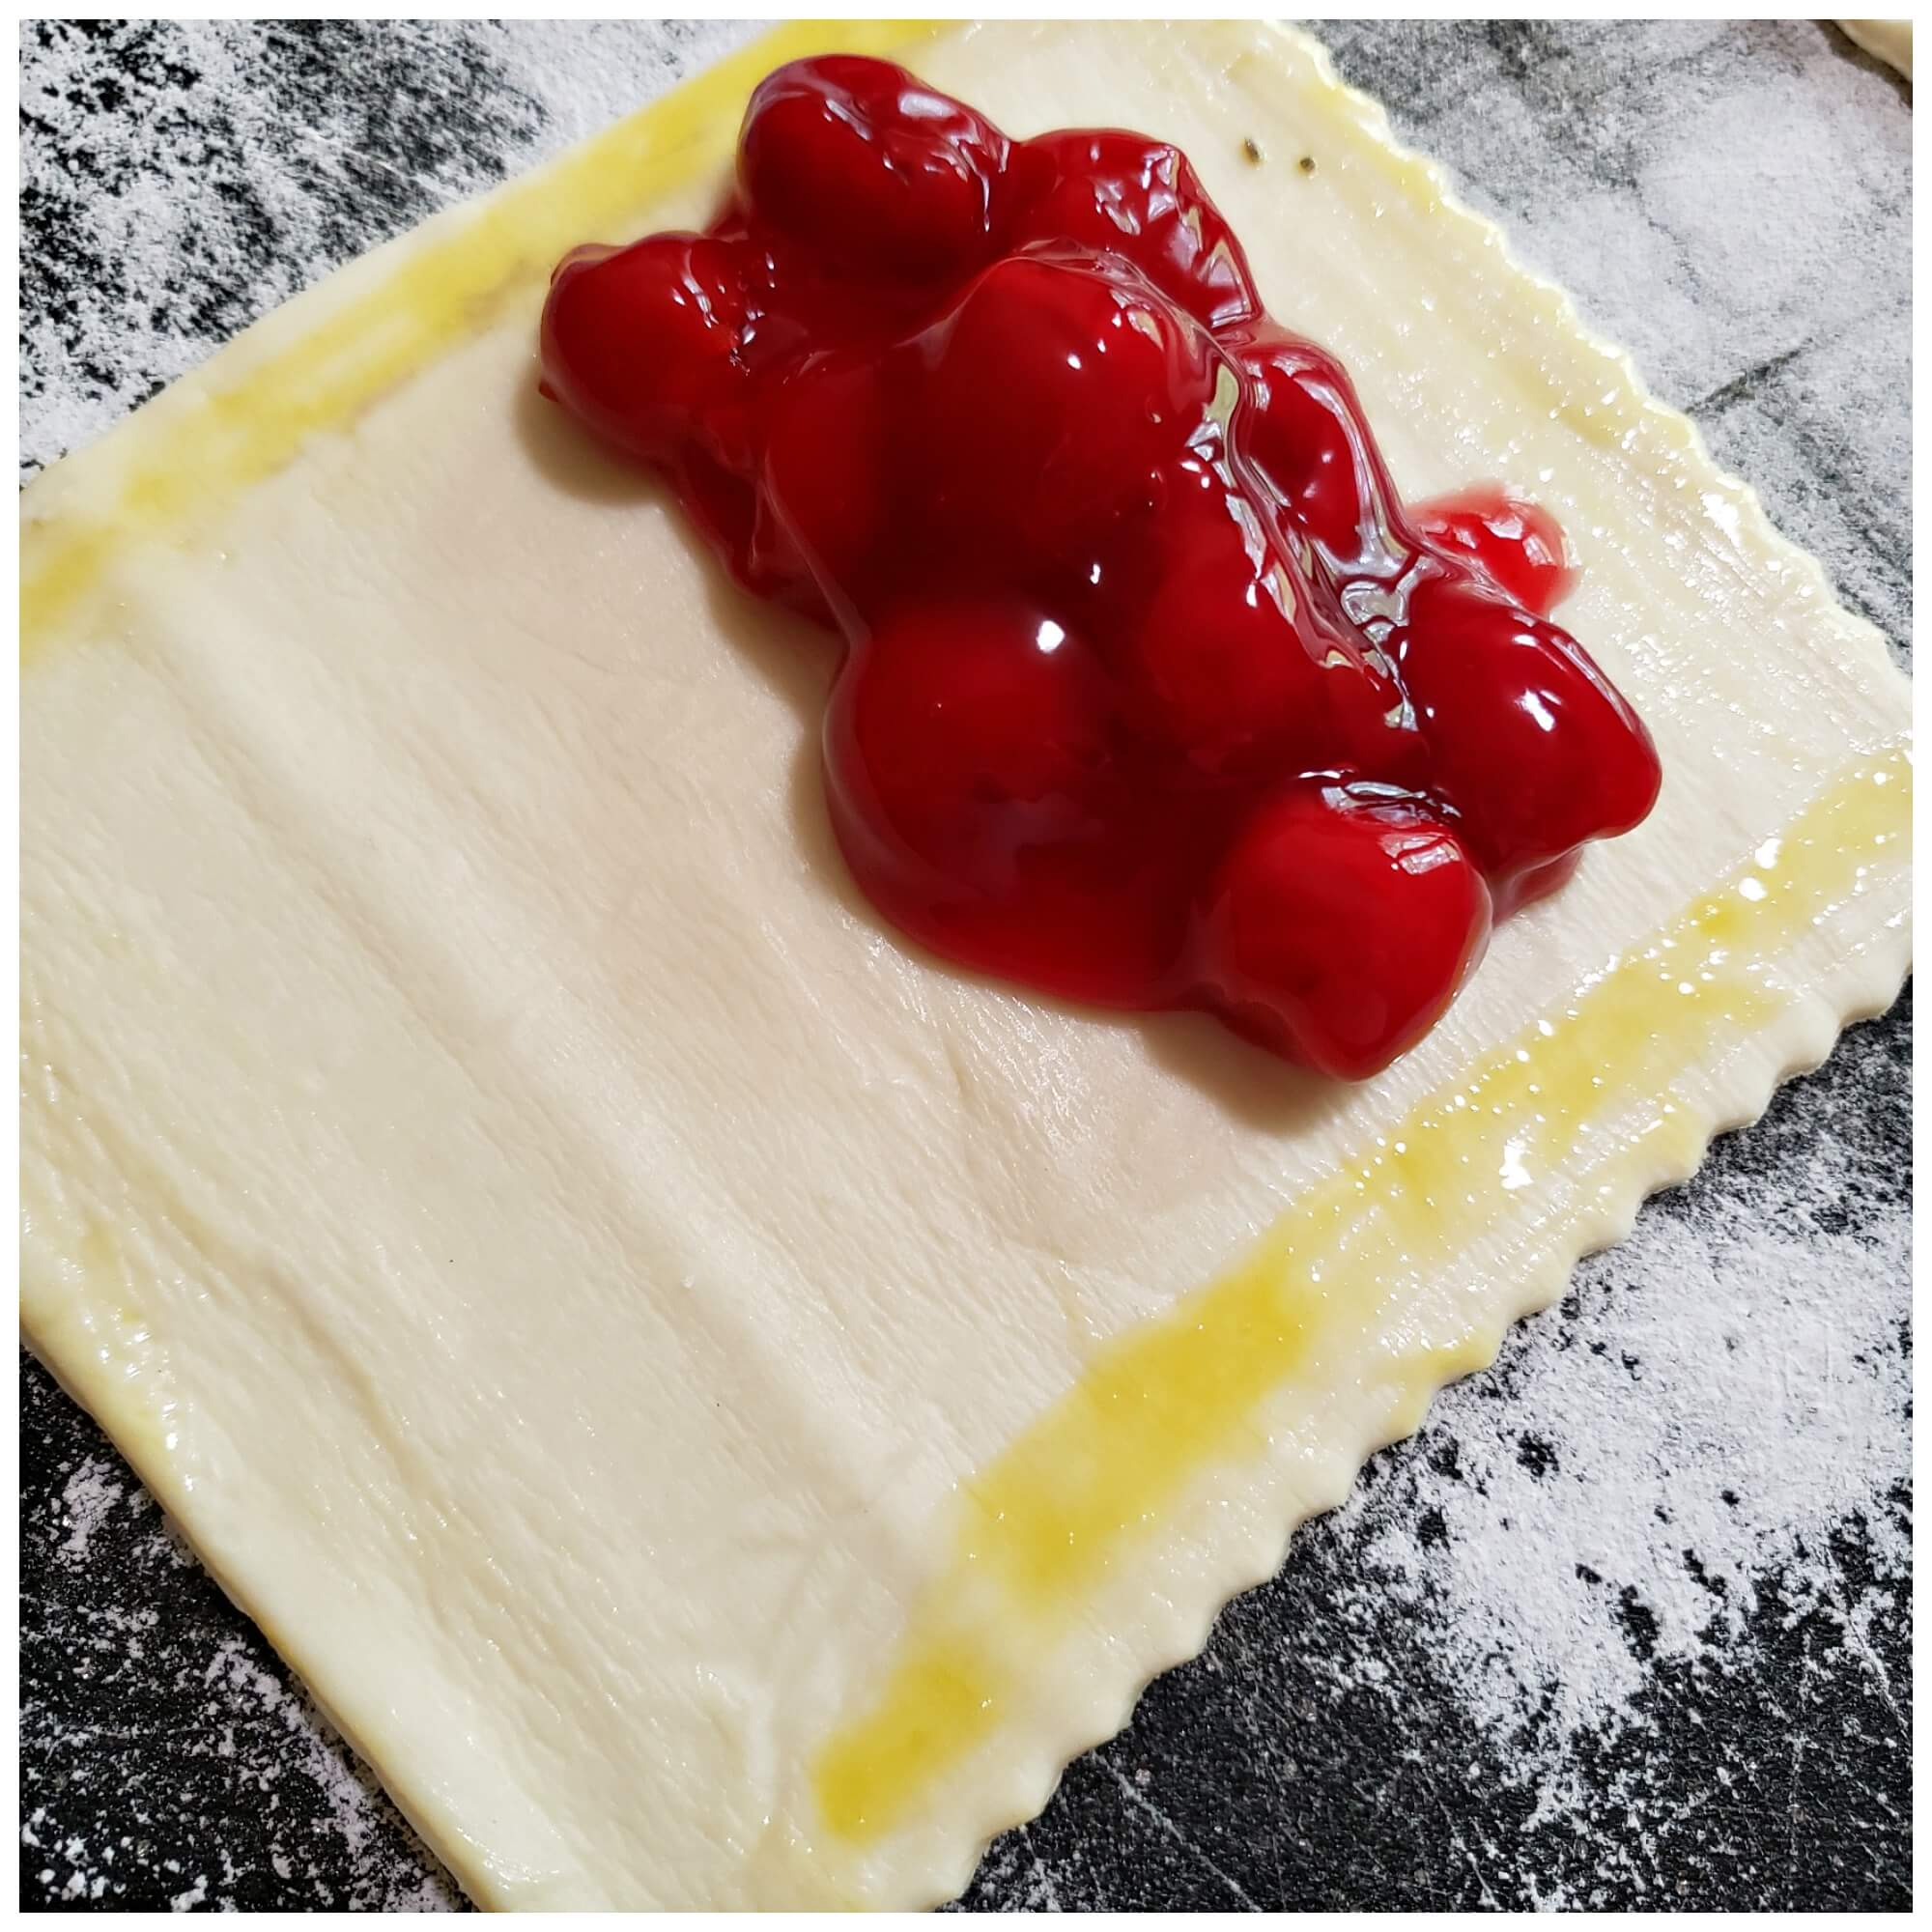 Cherry filled hand pie using puff pastry and pie filling